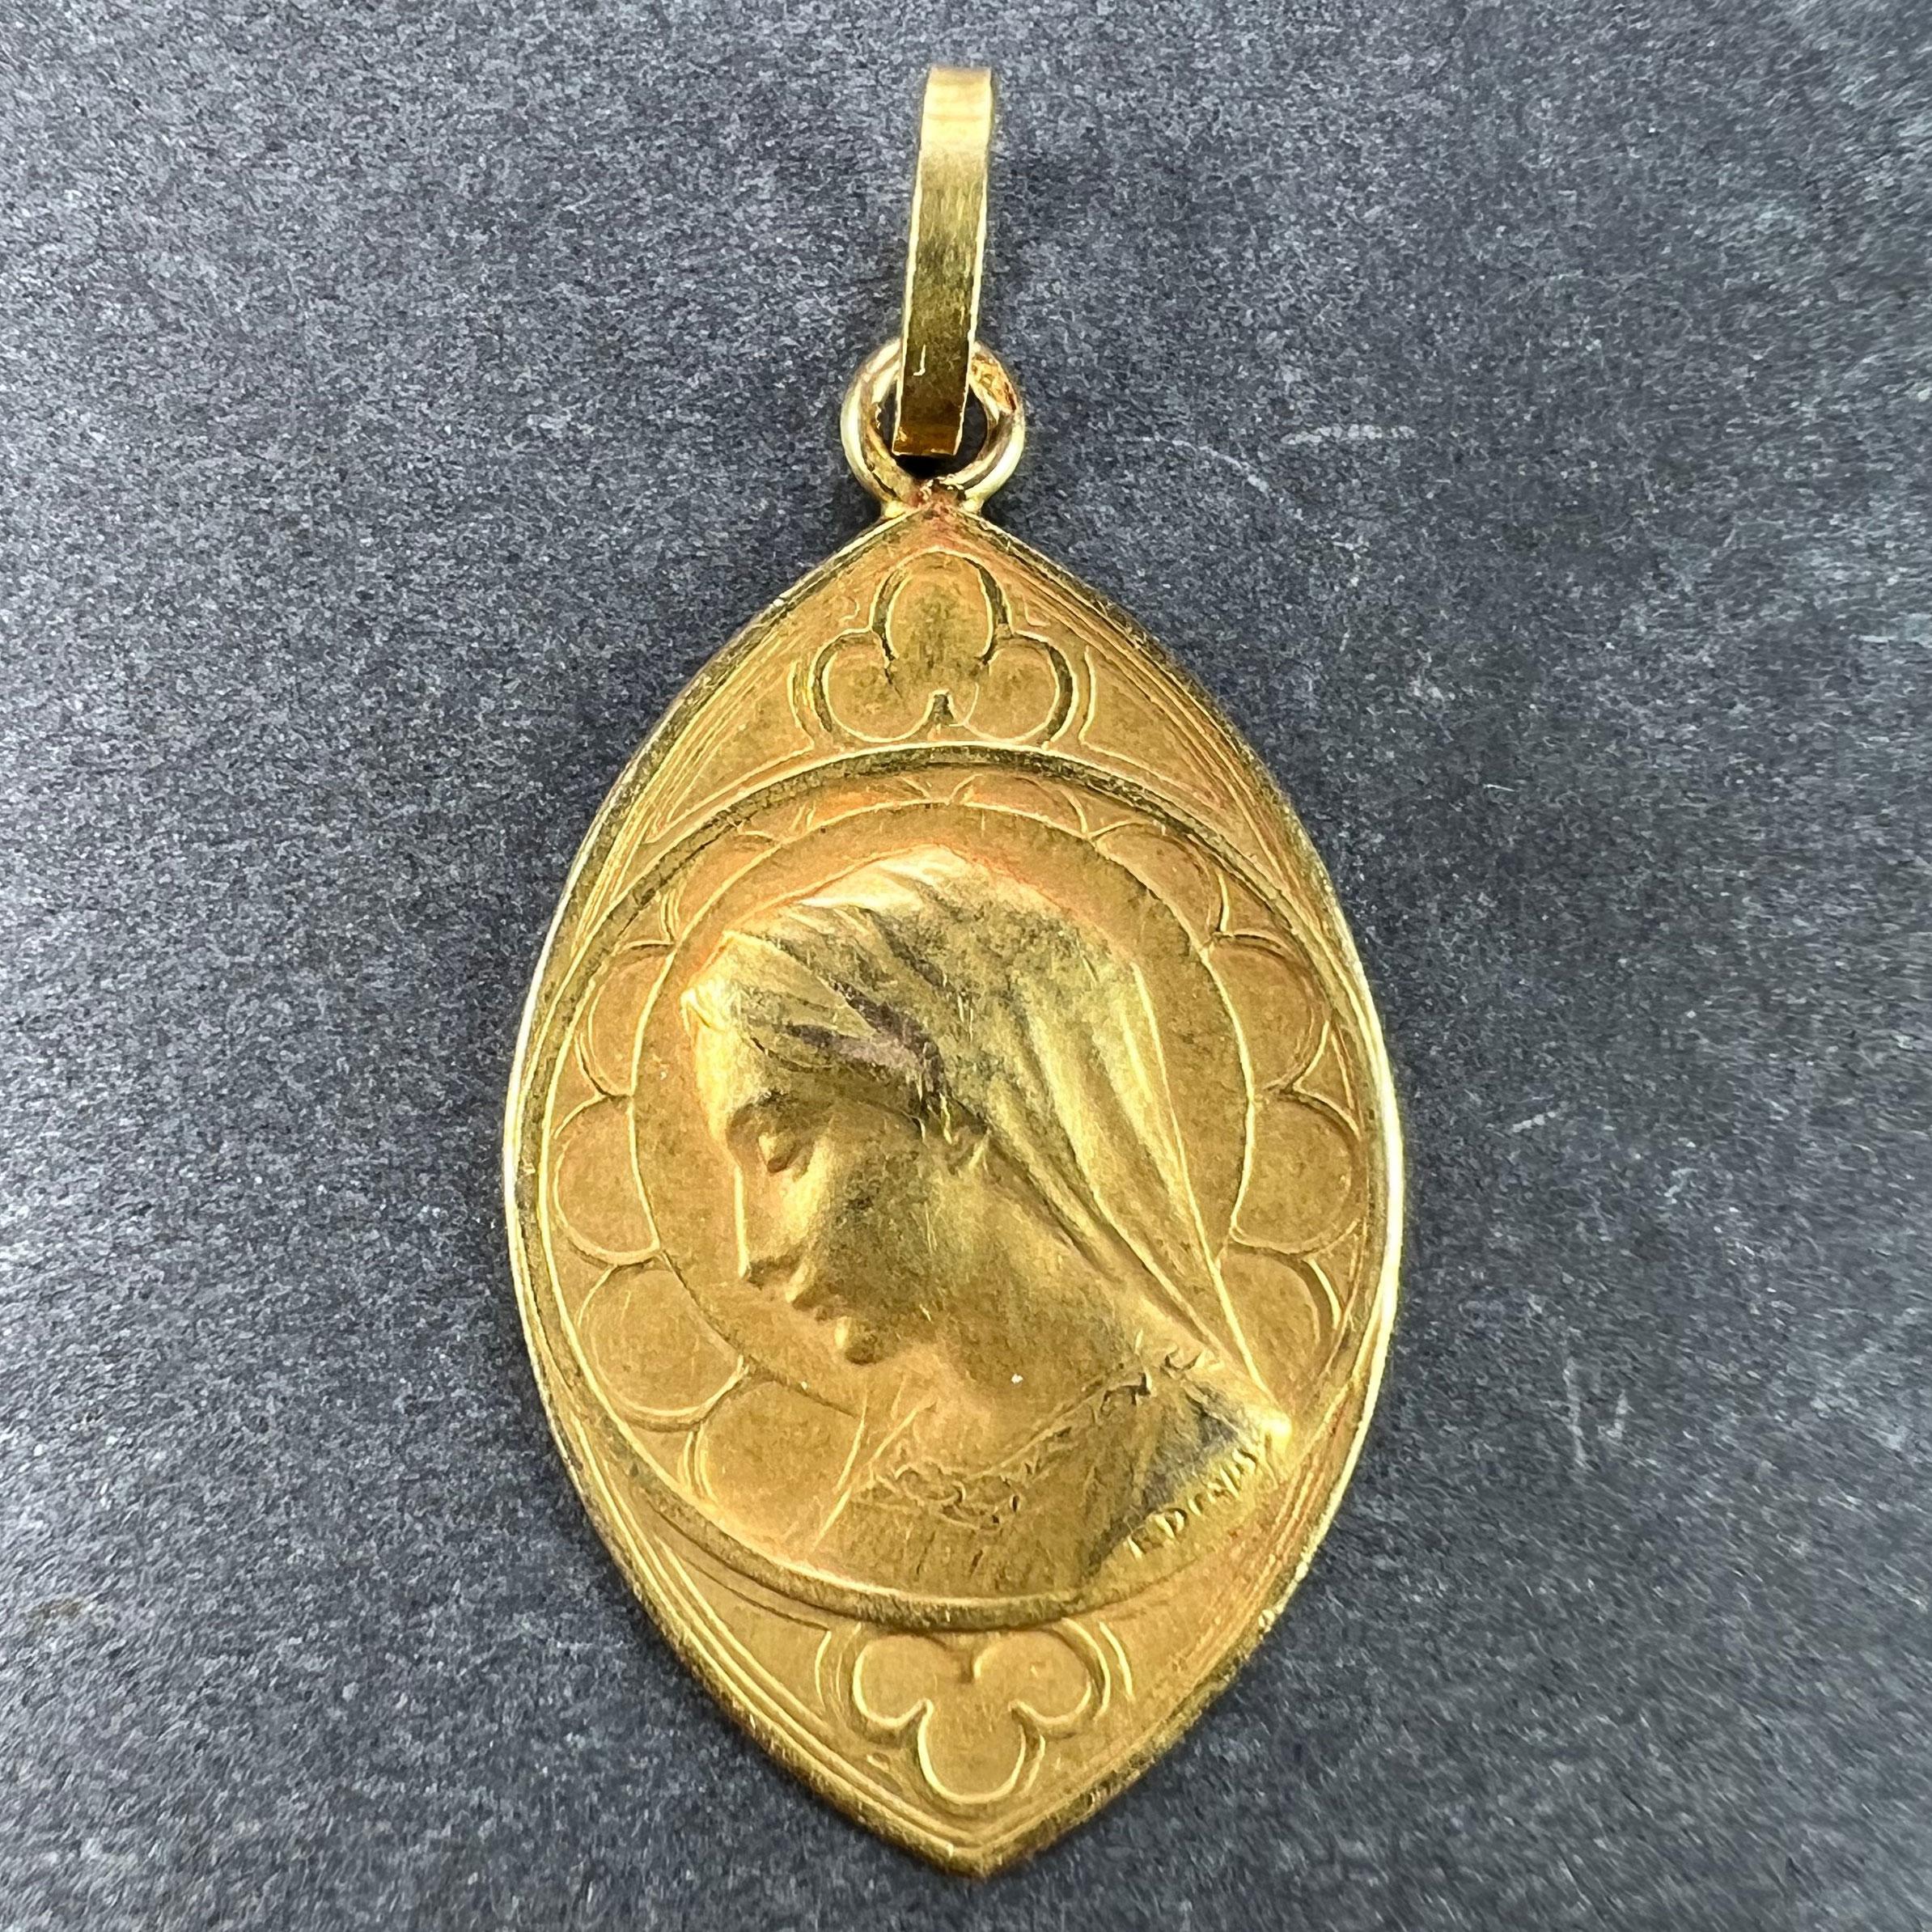 A French 18 karat (18K) yellow gold navette shaped charm pendant or medal designed by Dropsy depicting the Virgin Mary within a central circle with a gothic arch window surround. Stamped with the eagle's head for French manufacture, an unknown